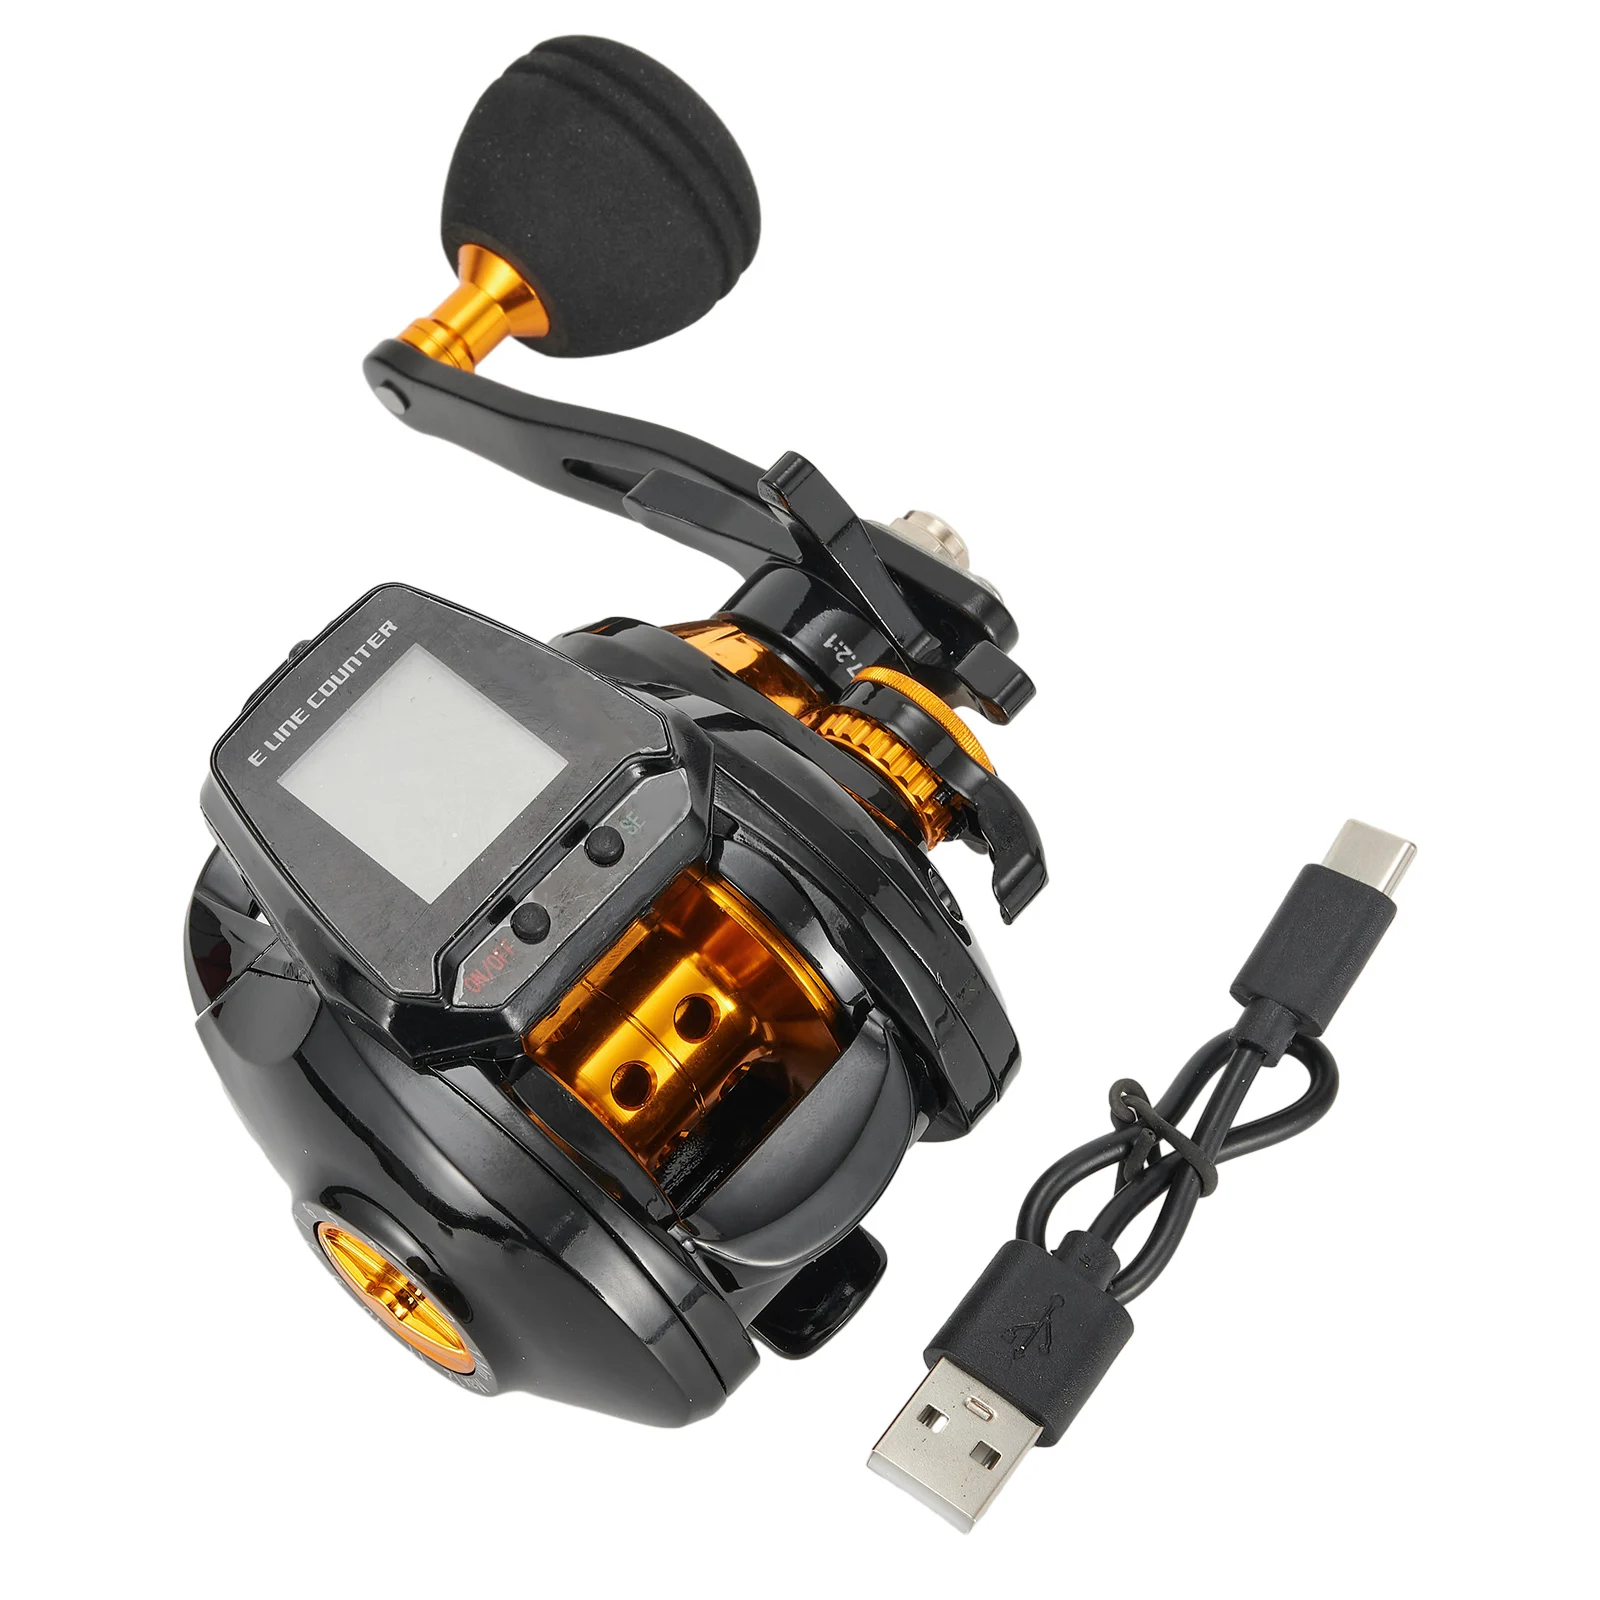 

6.3:1 Digital Fishing Baitcasting Reel With Accurate Line Counter Large Display Bite Alarm Left Hand Counting Fish Reels Tackle